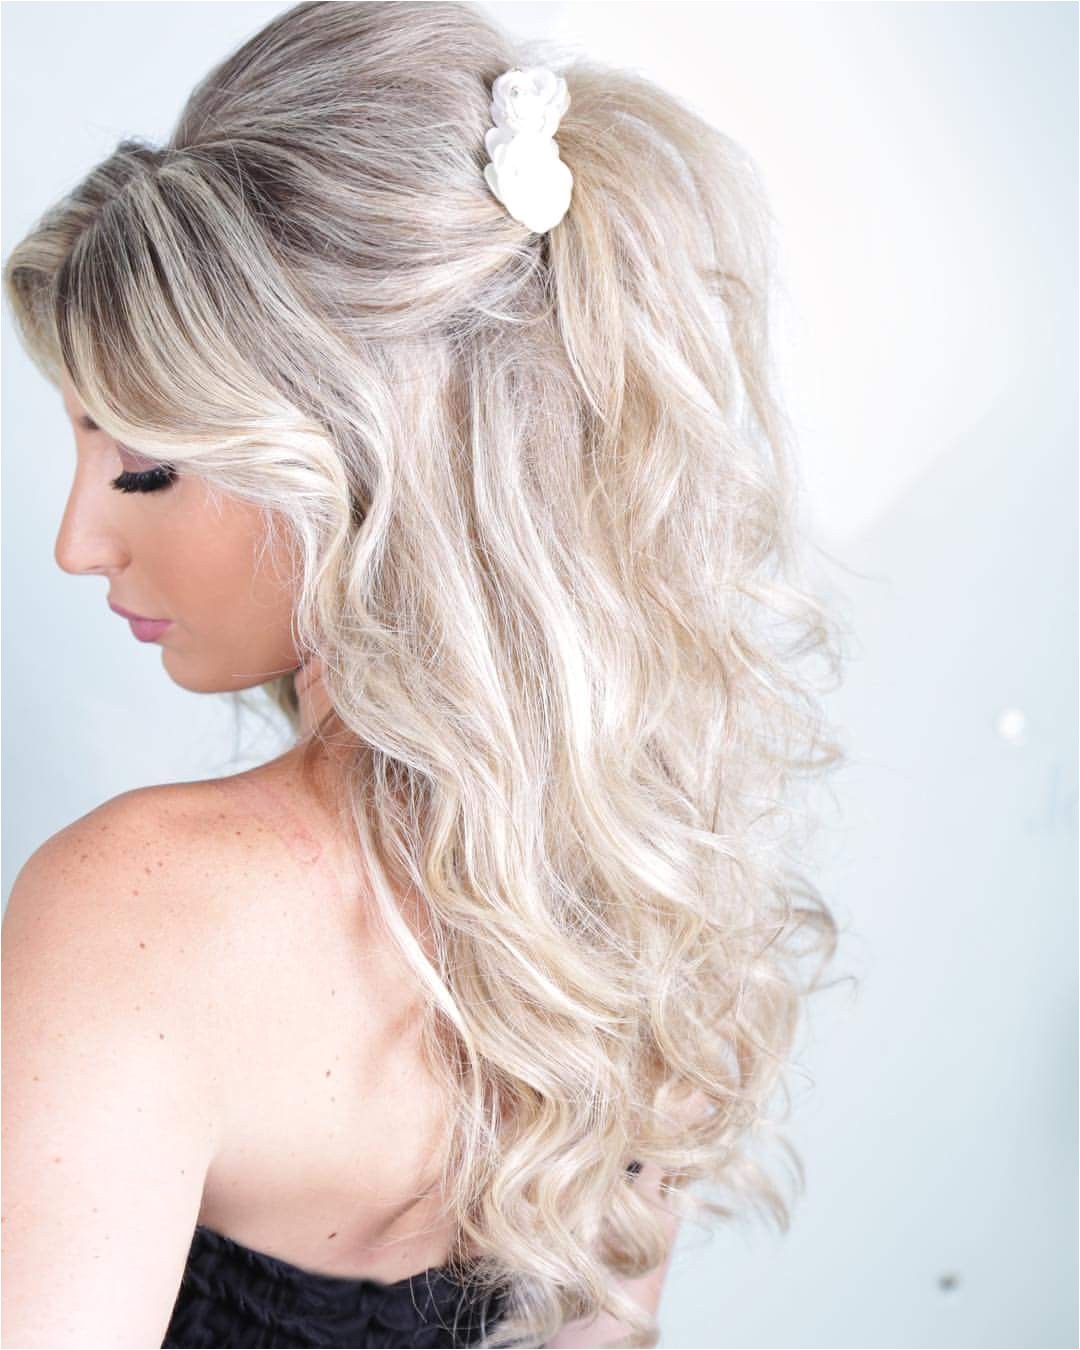 Some Up some Down Wedding Hairstyles 50 Chic Wedding Hairstyles for the Perfect Bridal Look